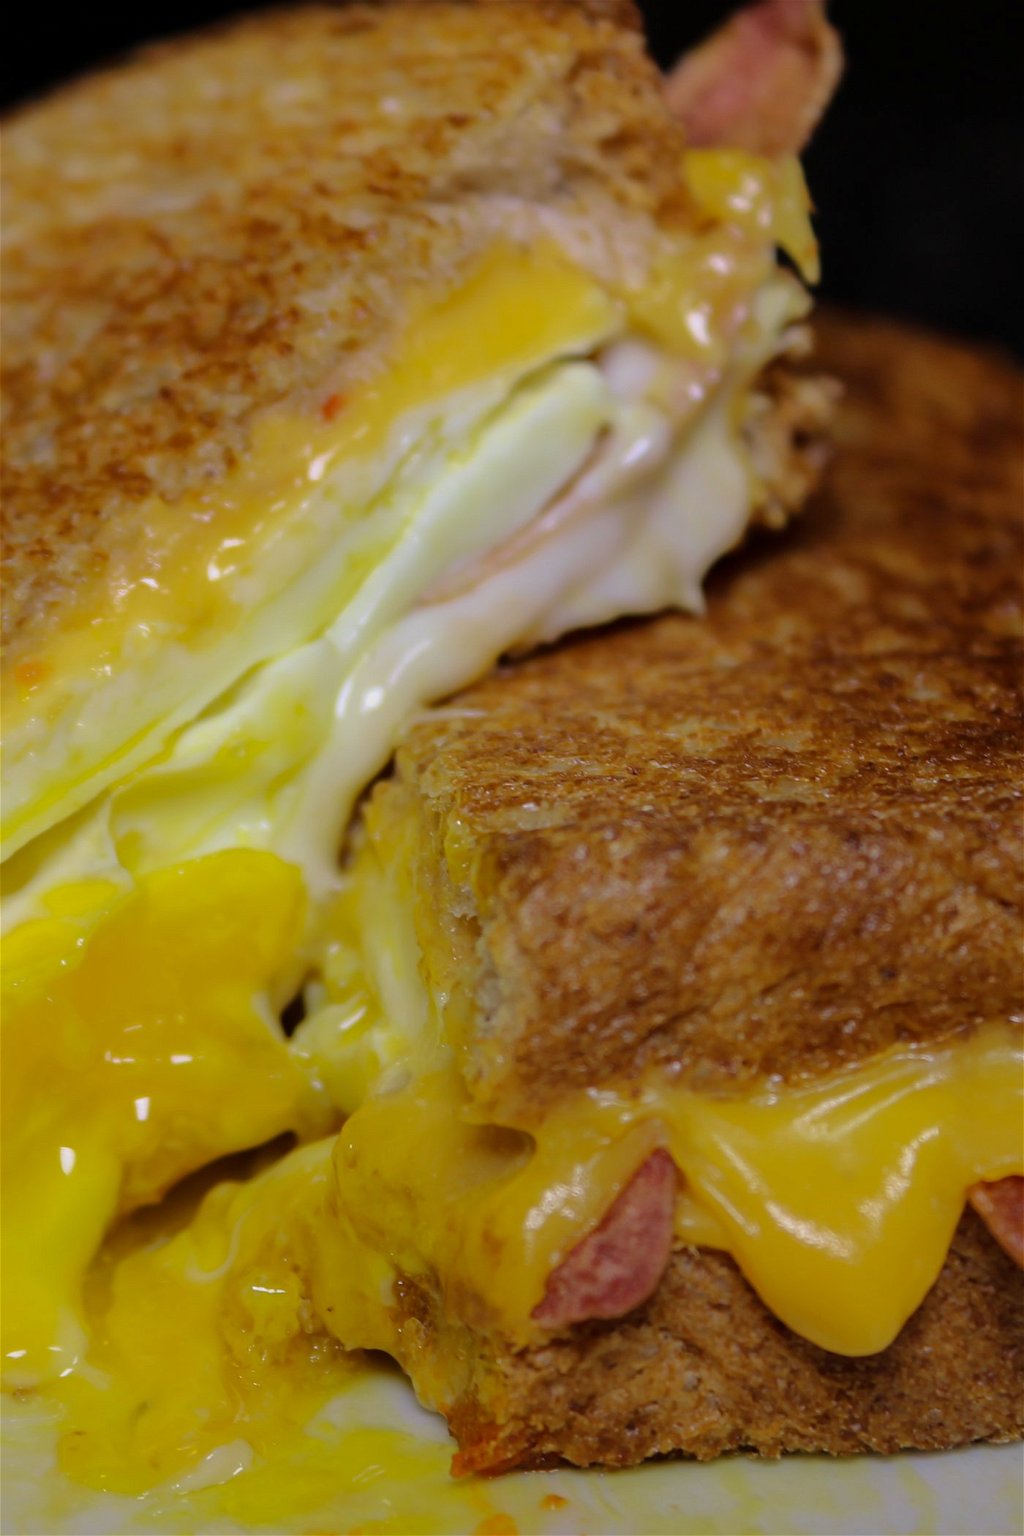 Bodybuilding Grilled Cheese Sandwich Recipe - The Protein Chef